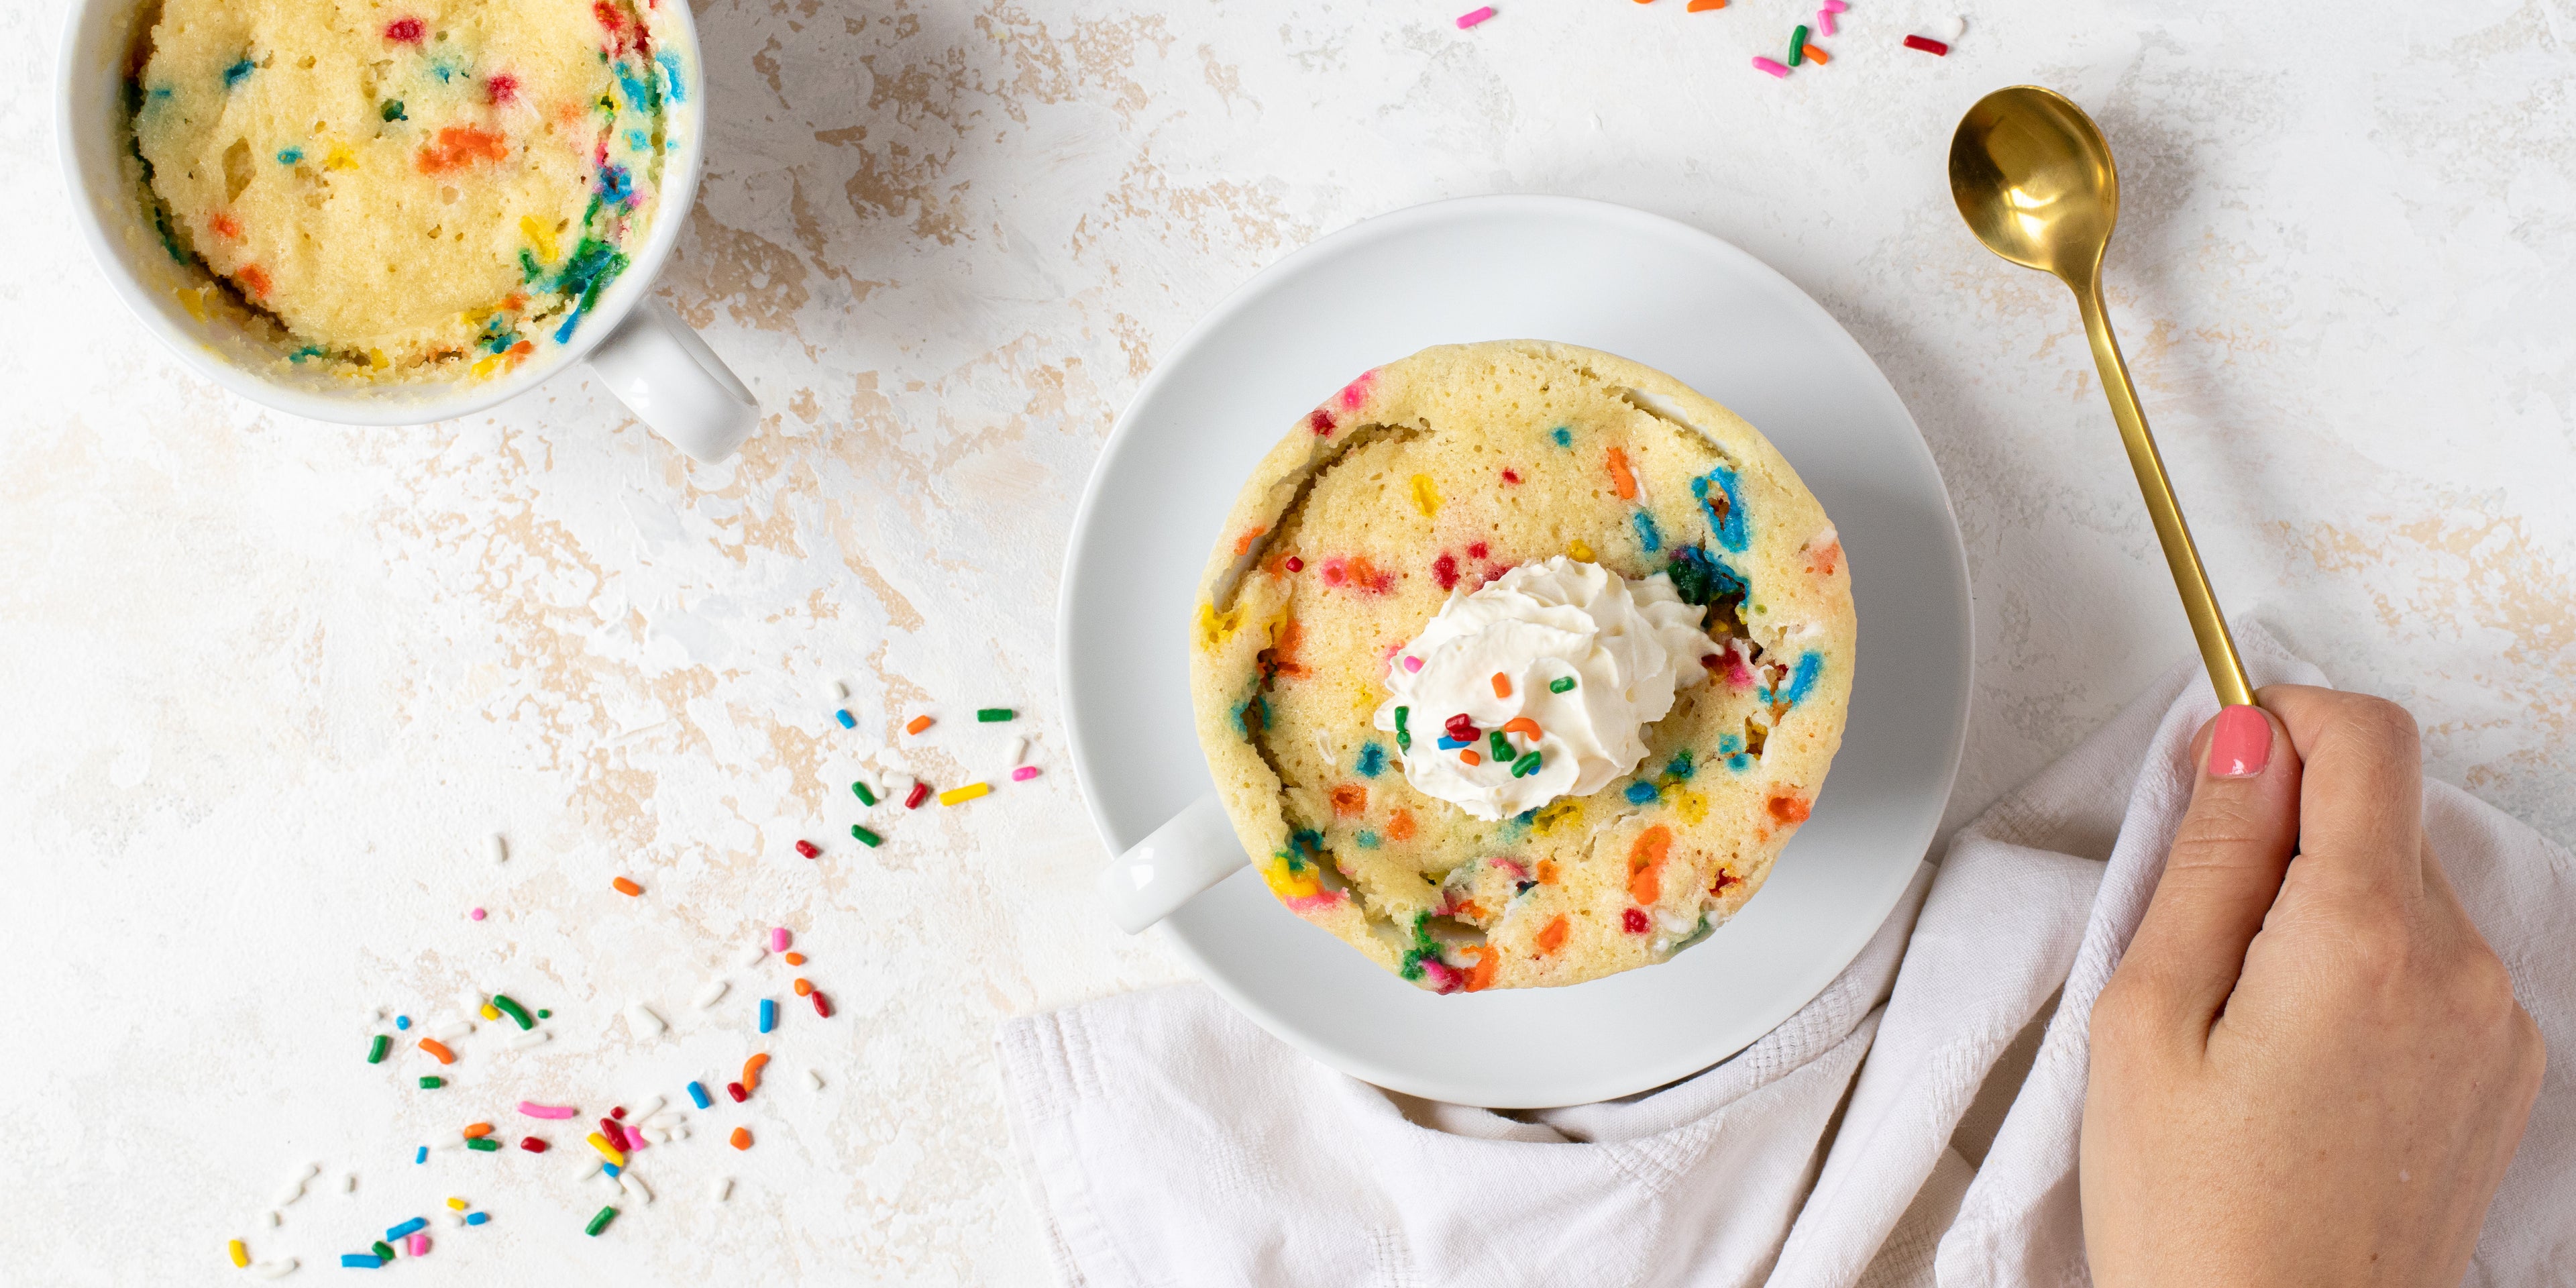 Birthday Cake Mug Cake with a hand holding a gold spoon. Mug cake is topped with whipped cream and sprinkles